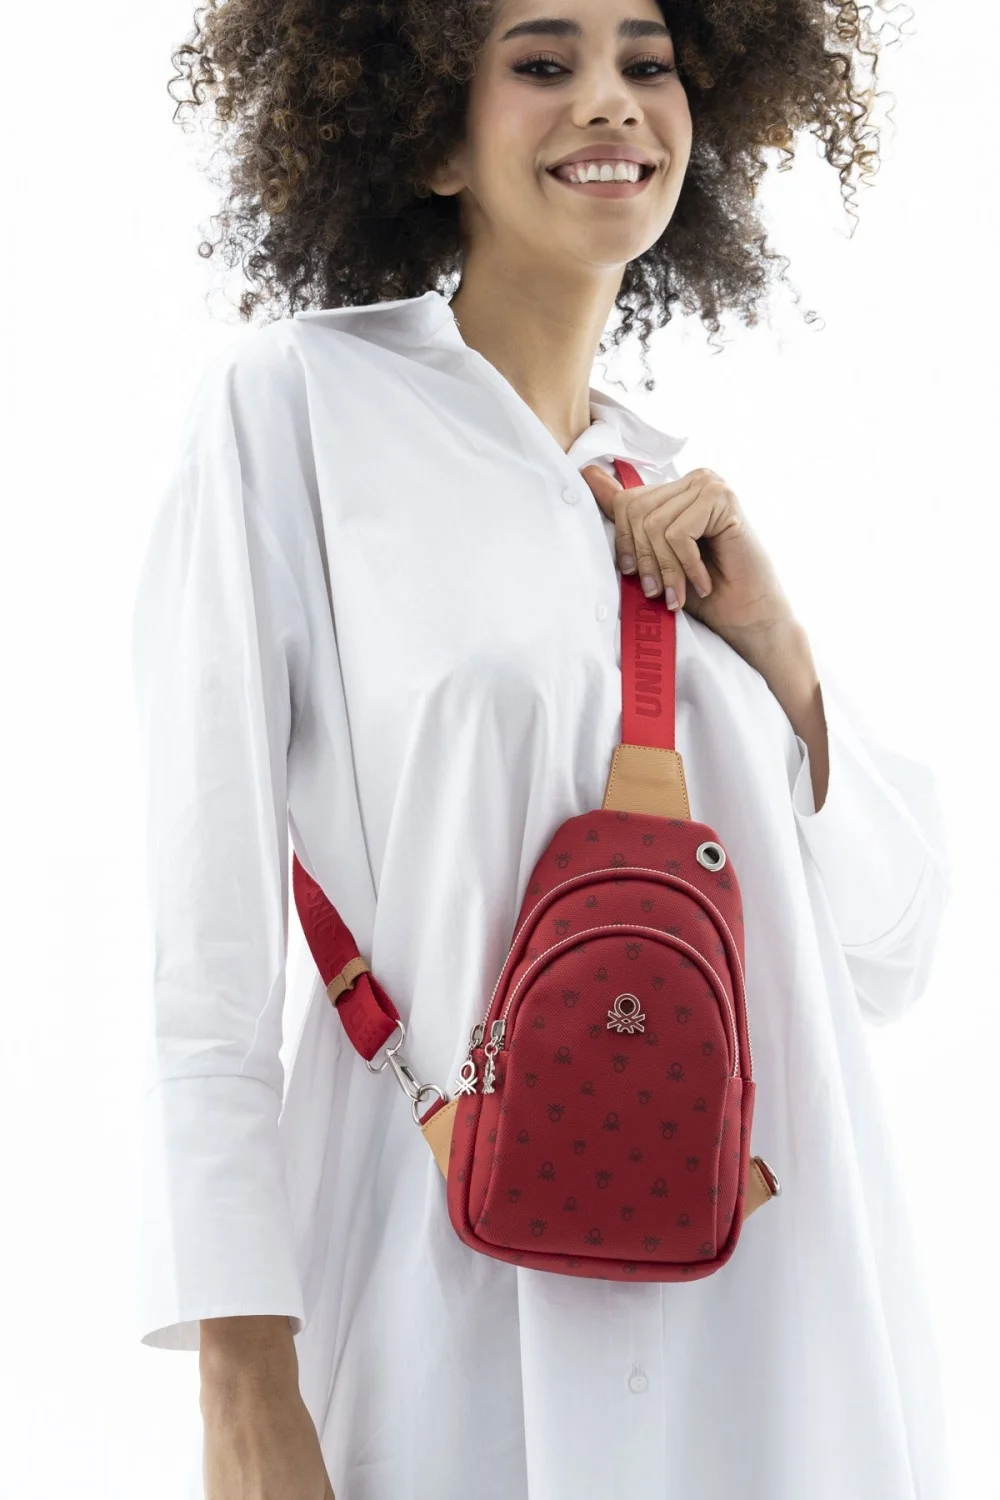 United Colors of Benetton BNT_489 RED Bag